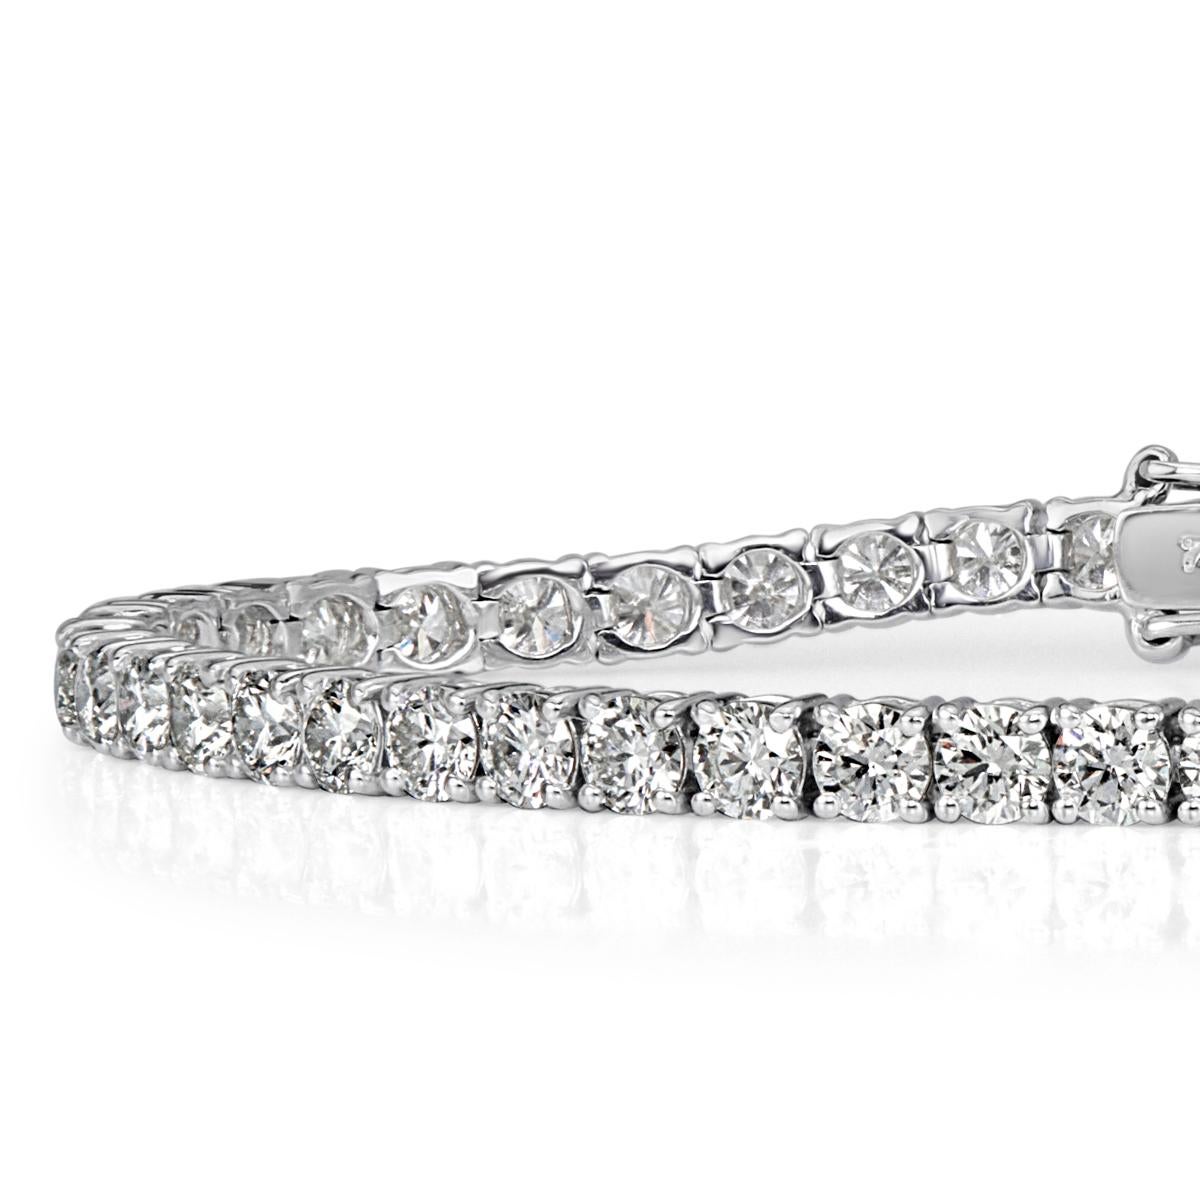 This elegant tennis bracelet features 7.30ct of round brilliant cut diamonds graded at G-H, VS2-SI1. The diamonds are impeccably matched and prong set in 18k white gold.
